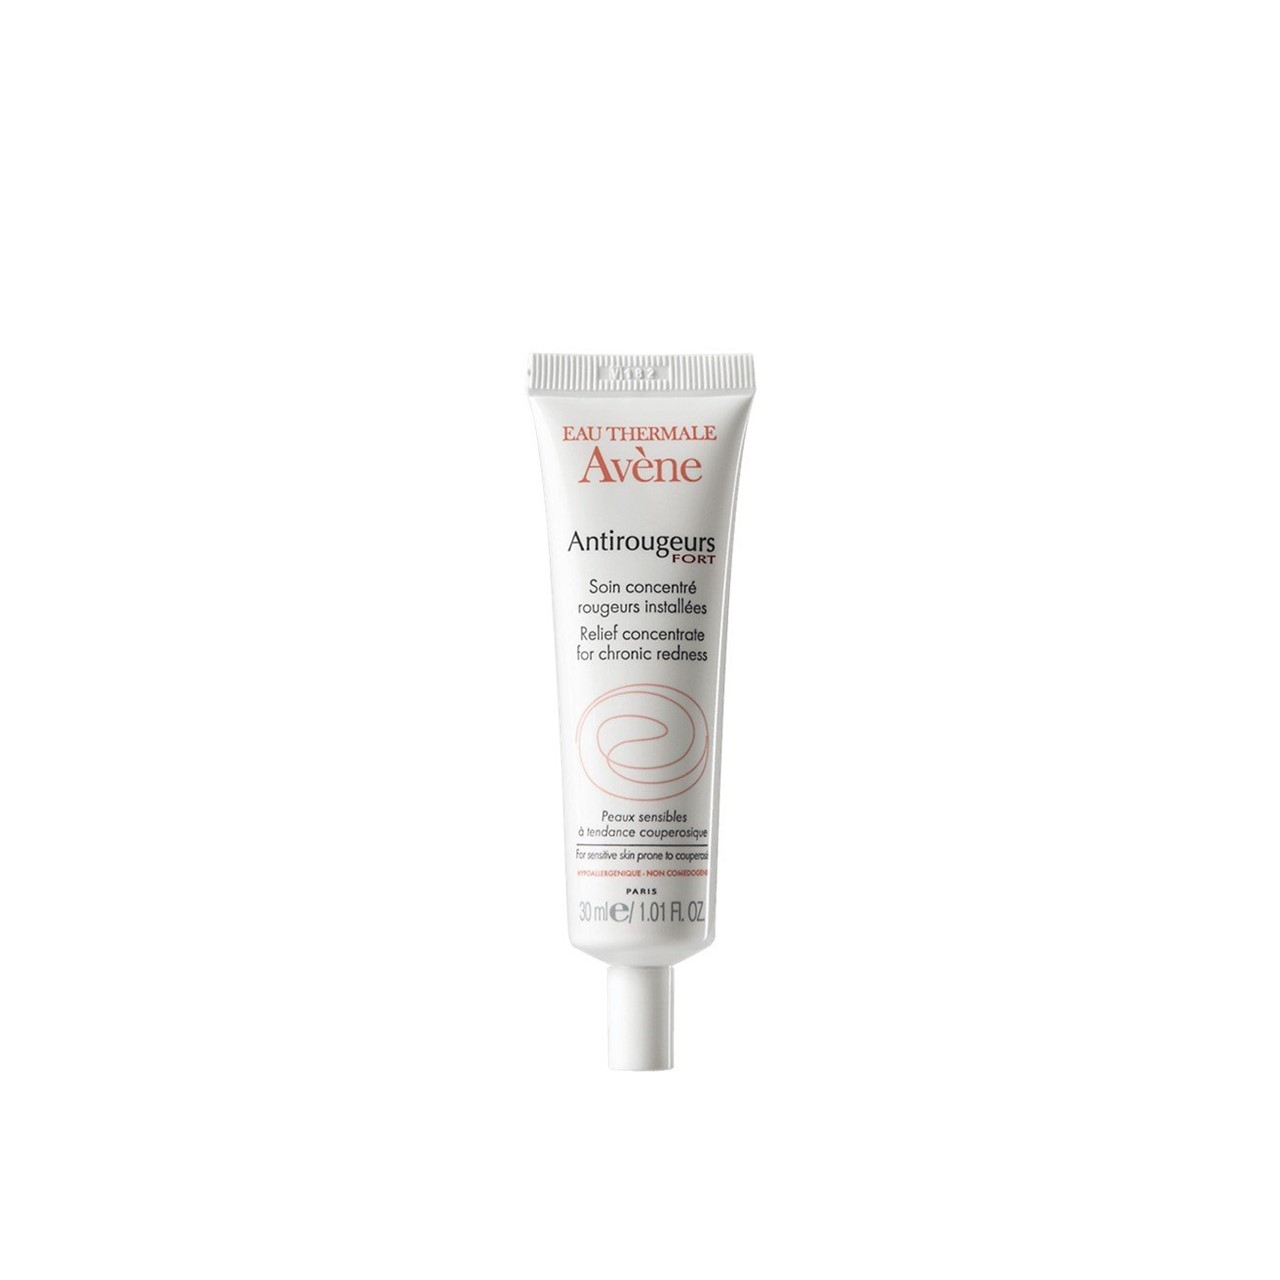 Avène Antirougeurs Fort Relief Concentrate for Chronic Redness 30ml (1.01 fl oz)